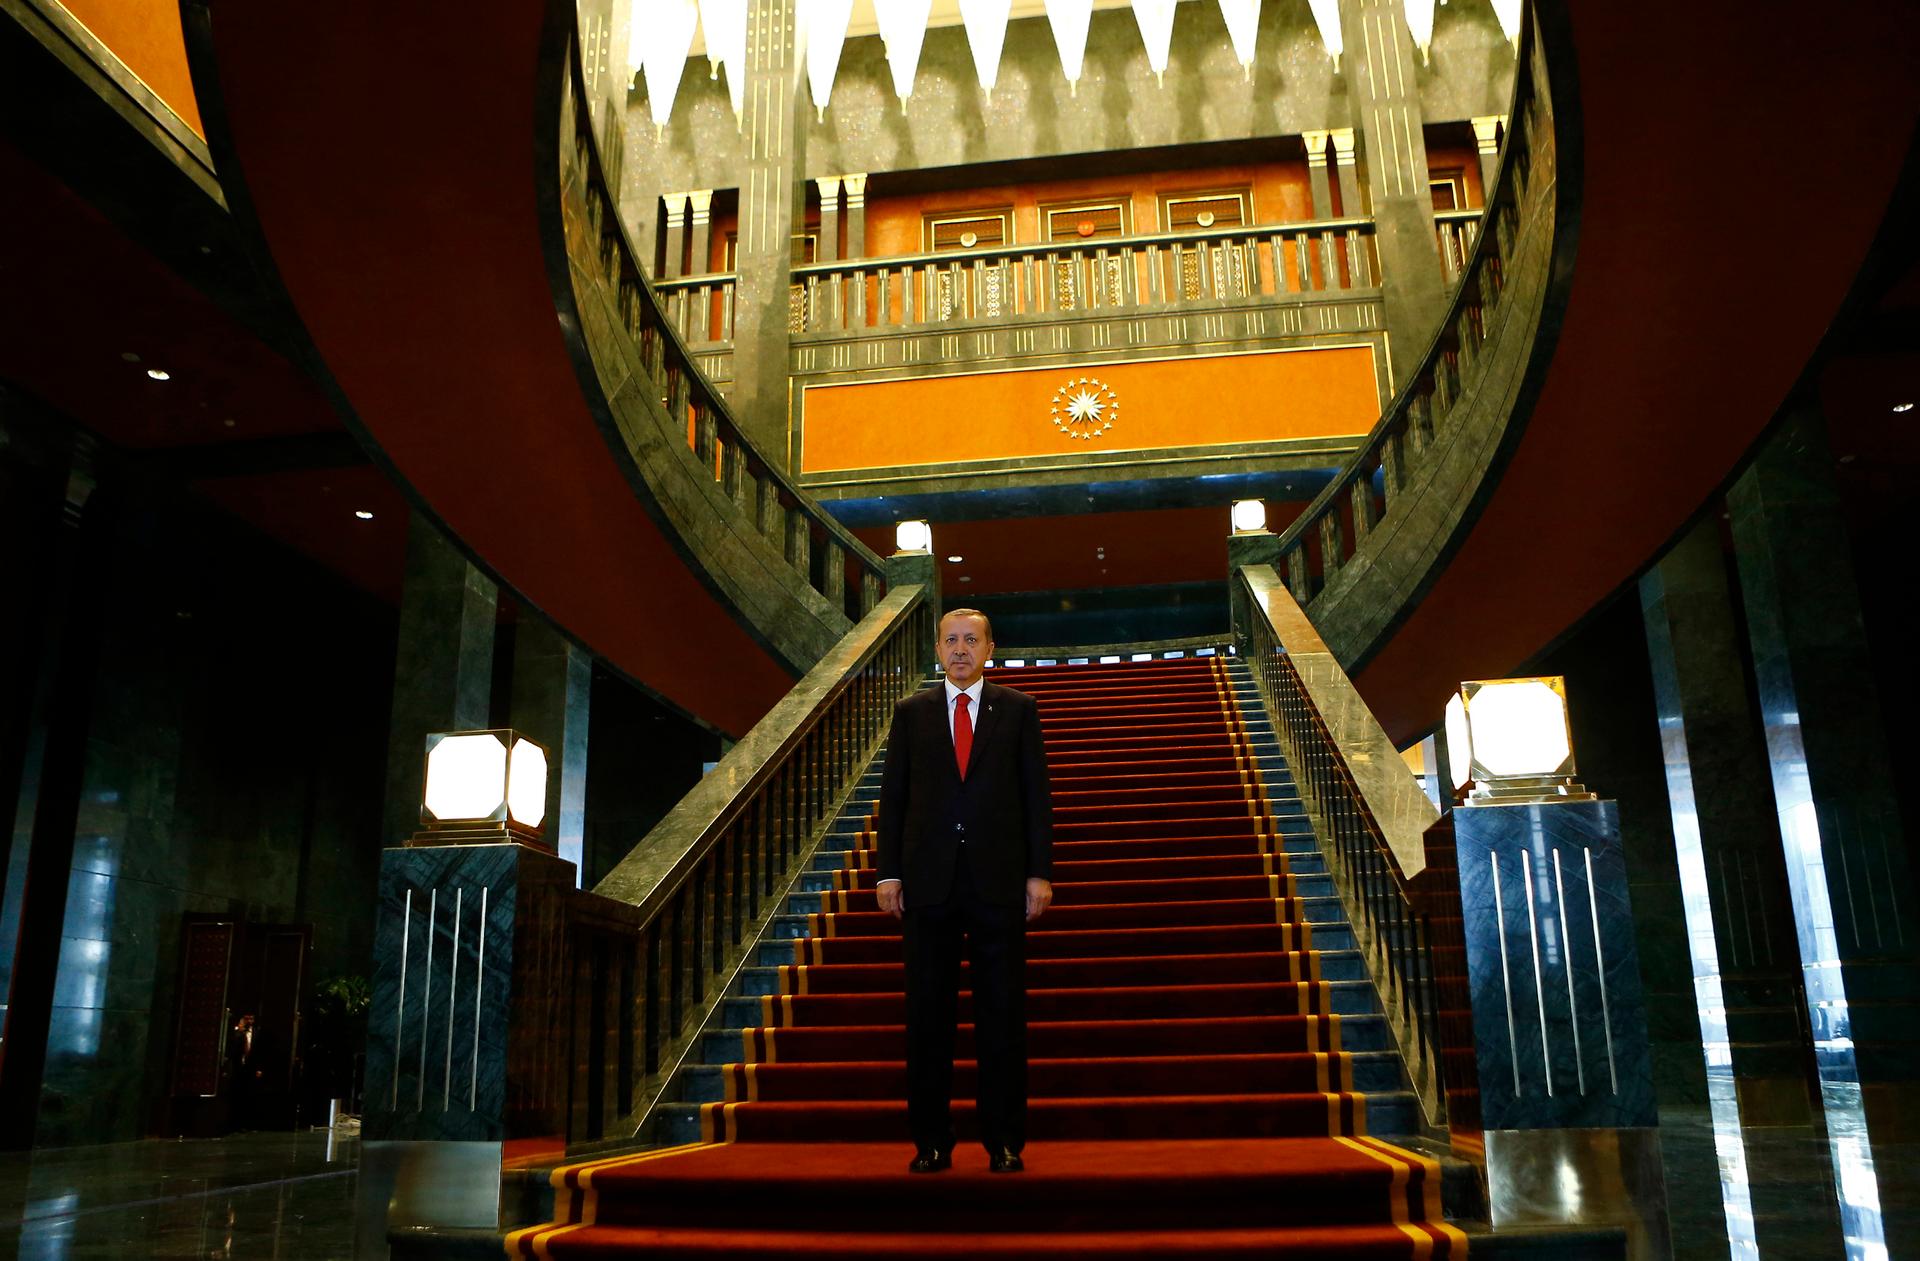 Turkey's President Tayyip Erdogan poses after an official ceremony to mark Republic Day at the new Presidential Palace in Ankara October 29, 2014.